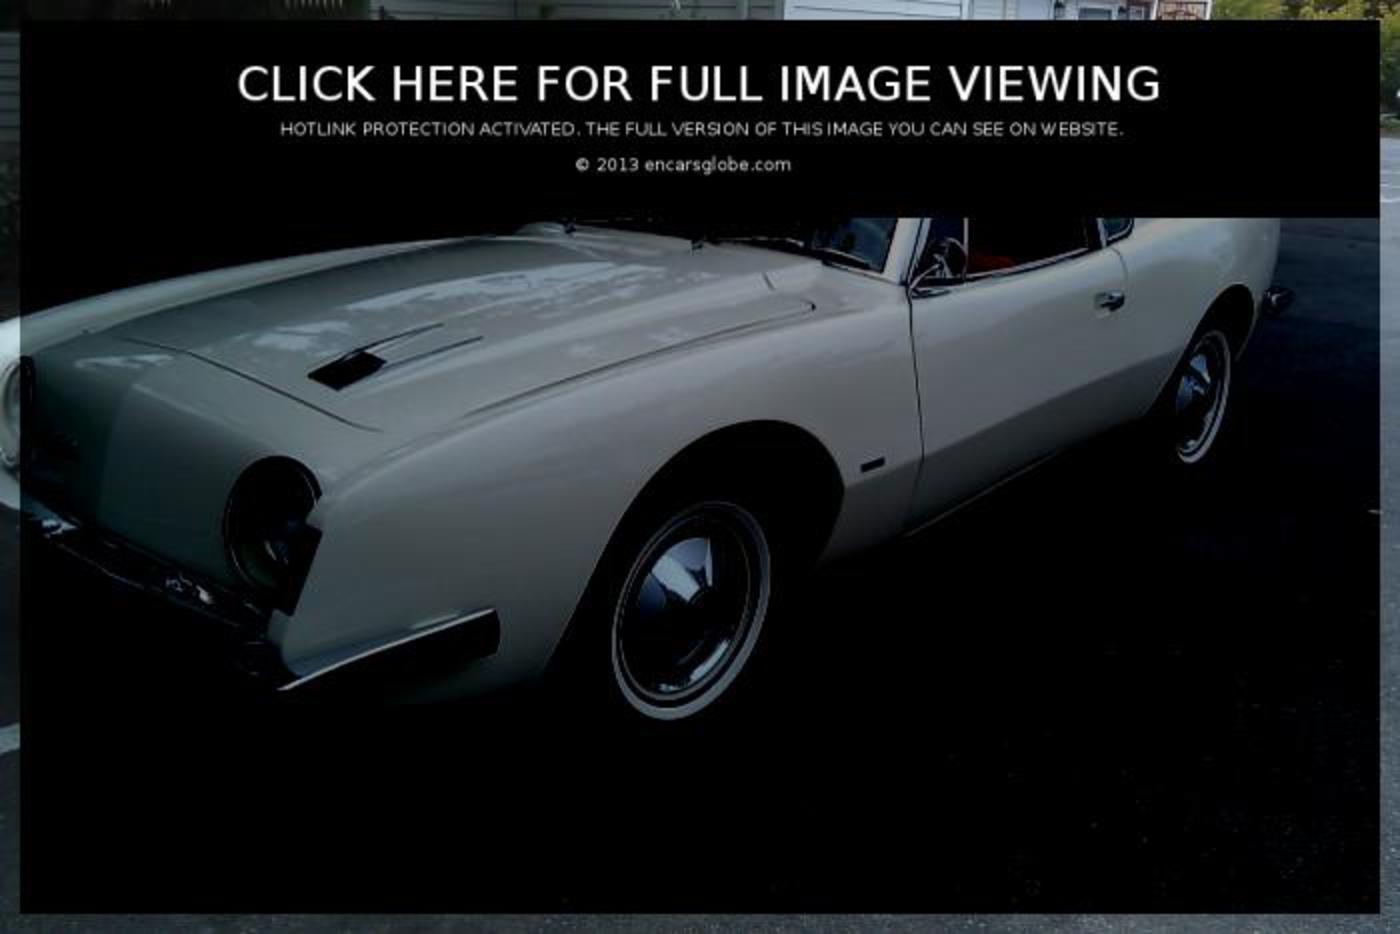 Studebaker Avanti T-Top: Photo gallery, complete information about ...